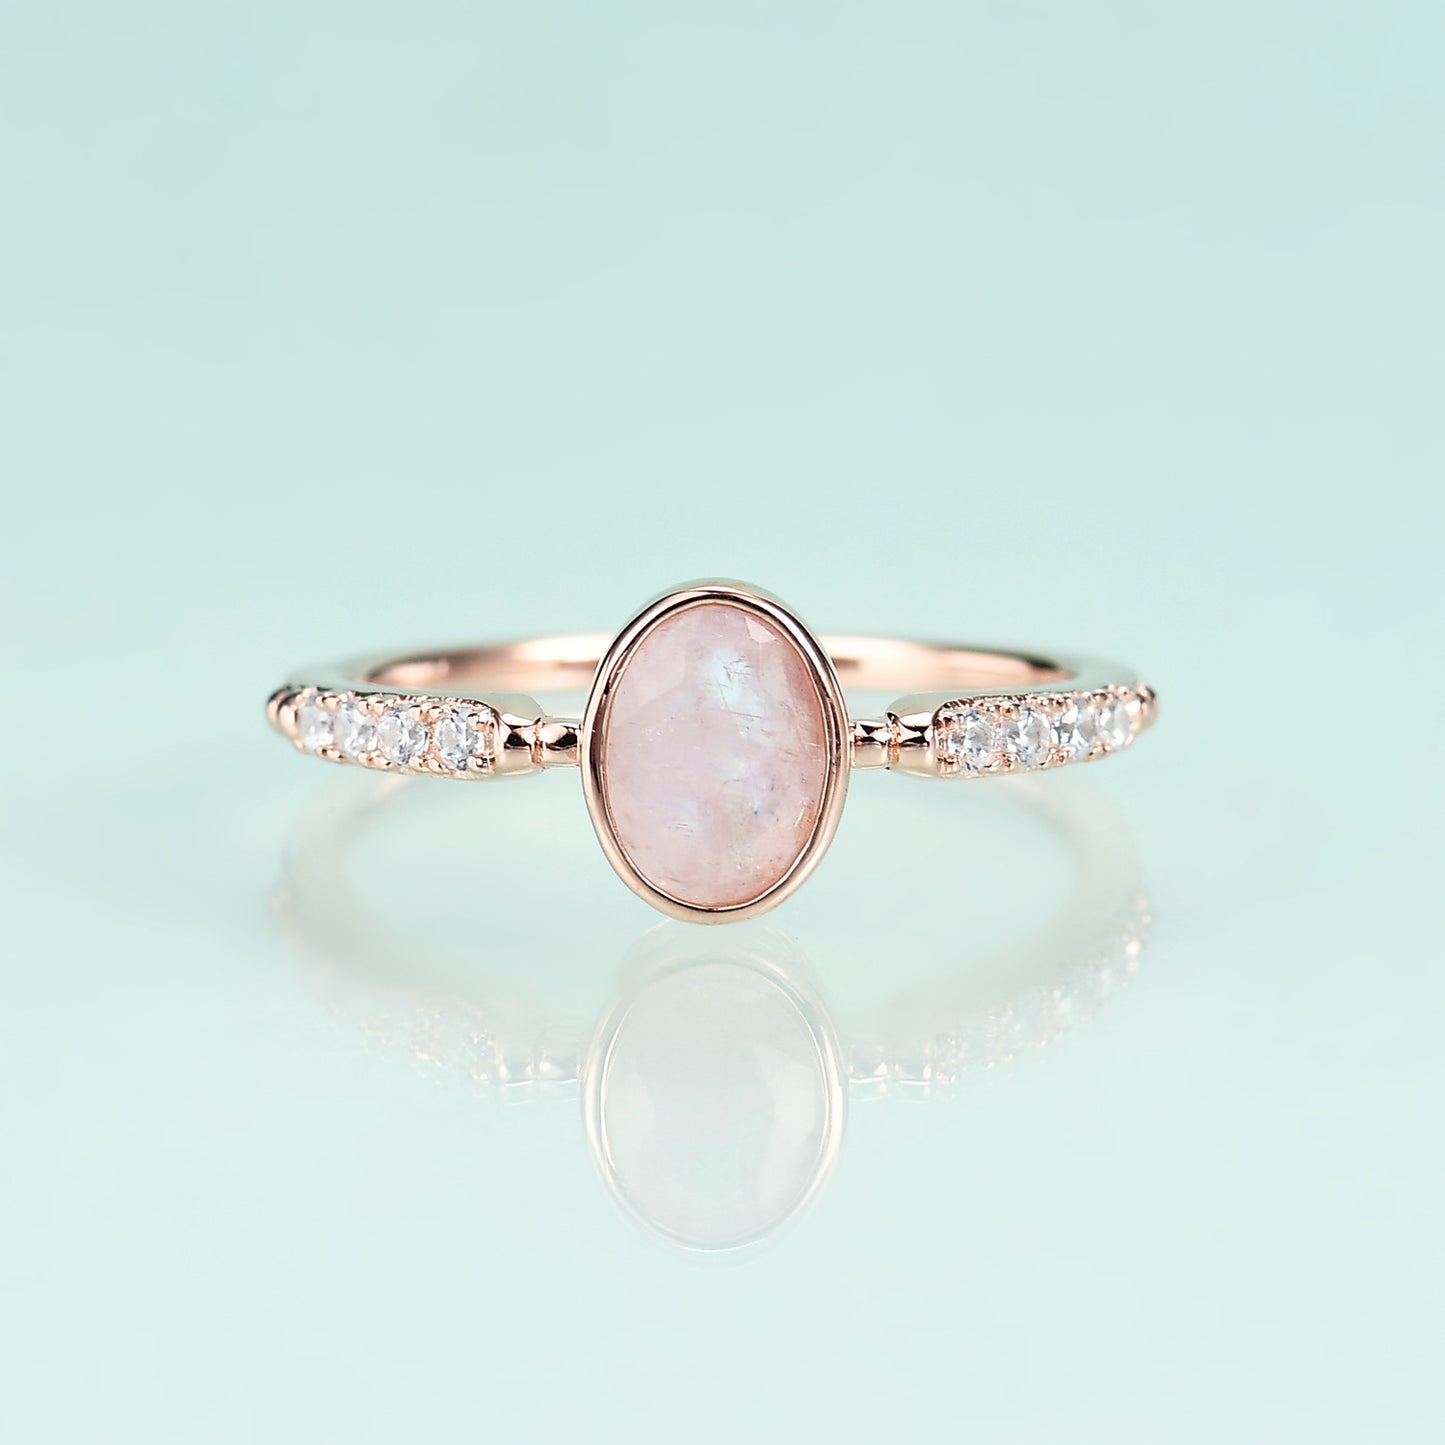 Luxury S925 Sterling Silver Inlaid with Precious Natural Moonstone Rose Gold Colour Ring for Women